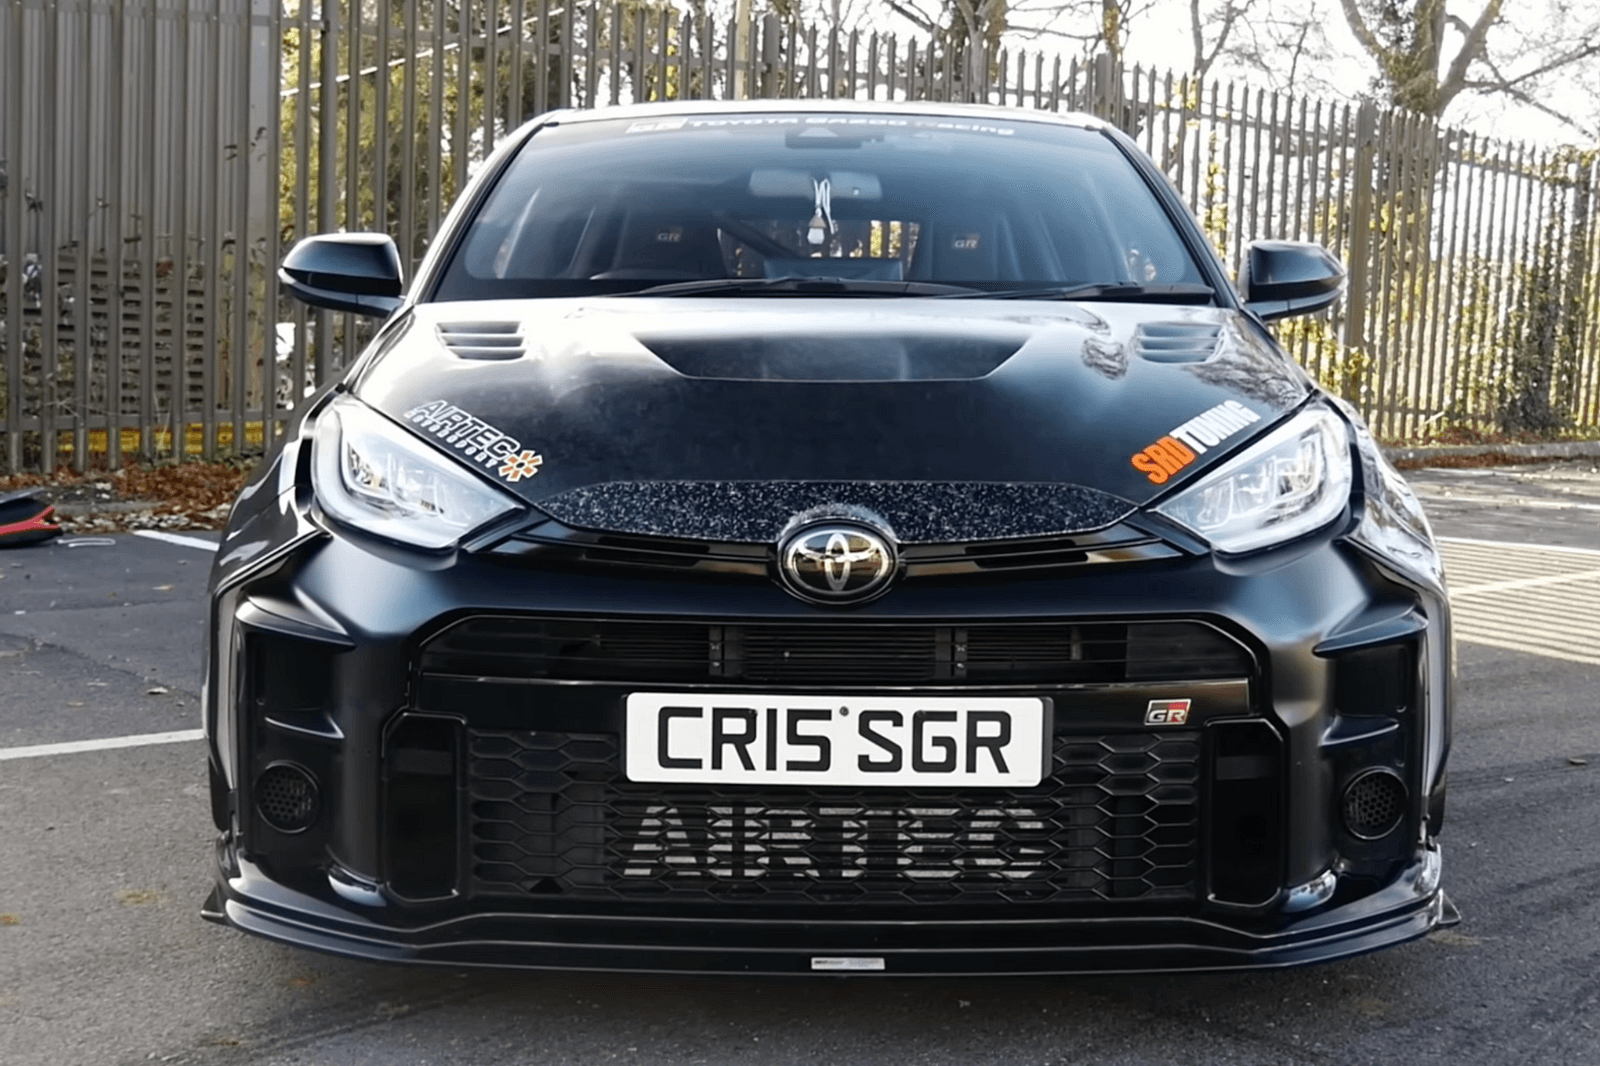 New 2024 Toyota GR Yaris hot hatch is here: more power, new